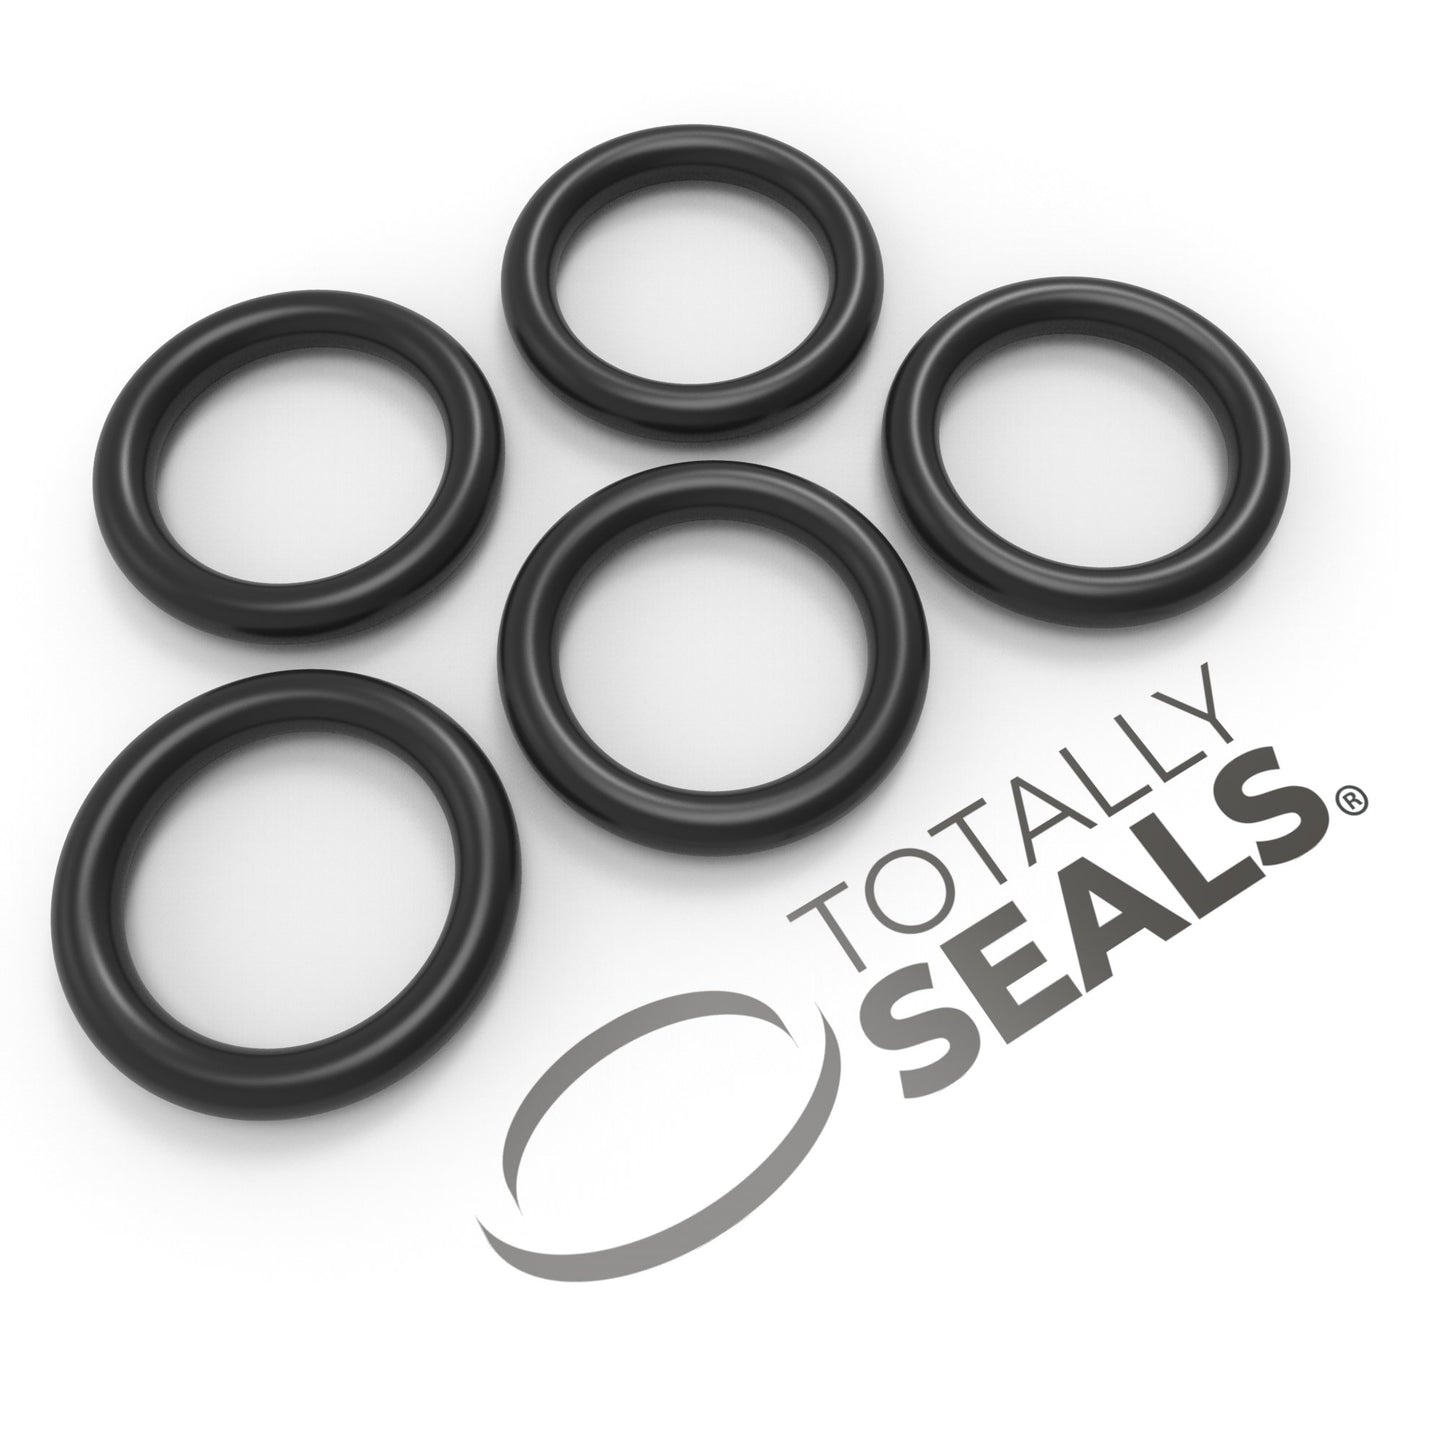 6mm x 3mm (12mm OD) Nitrile O-Rings - Totally Seals®